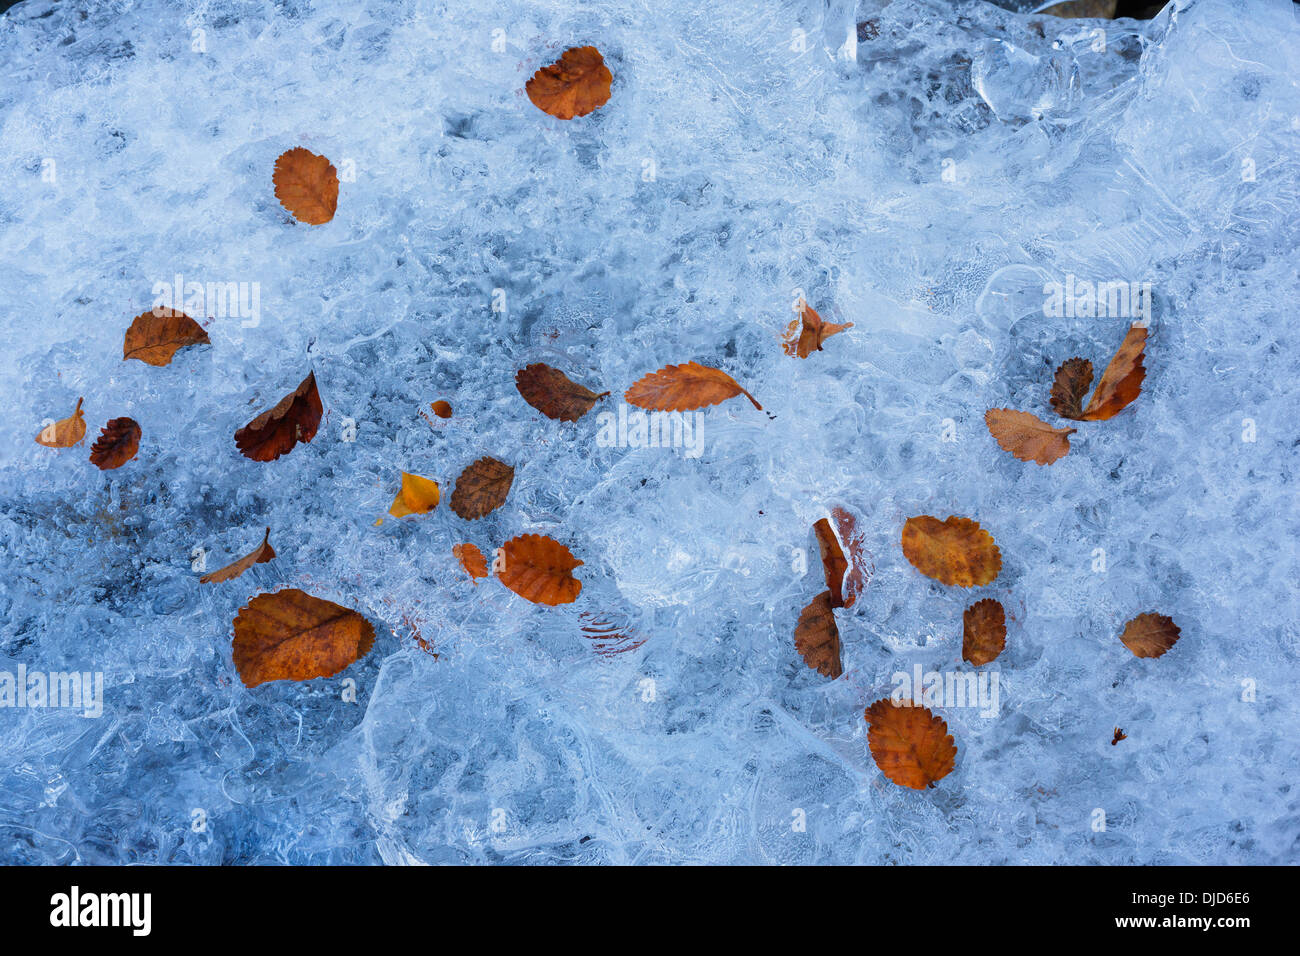 Frozen stream with autum leaves on the ice.Patagonia.Chile Stock Photo